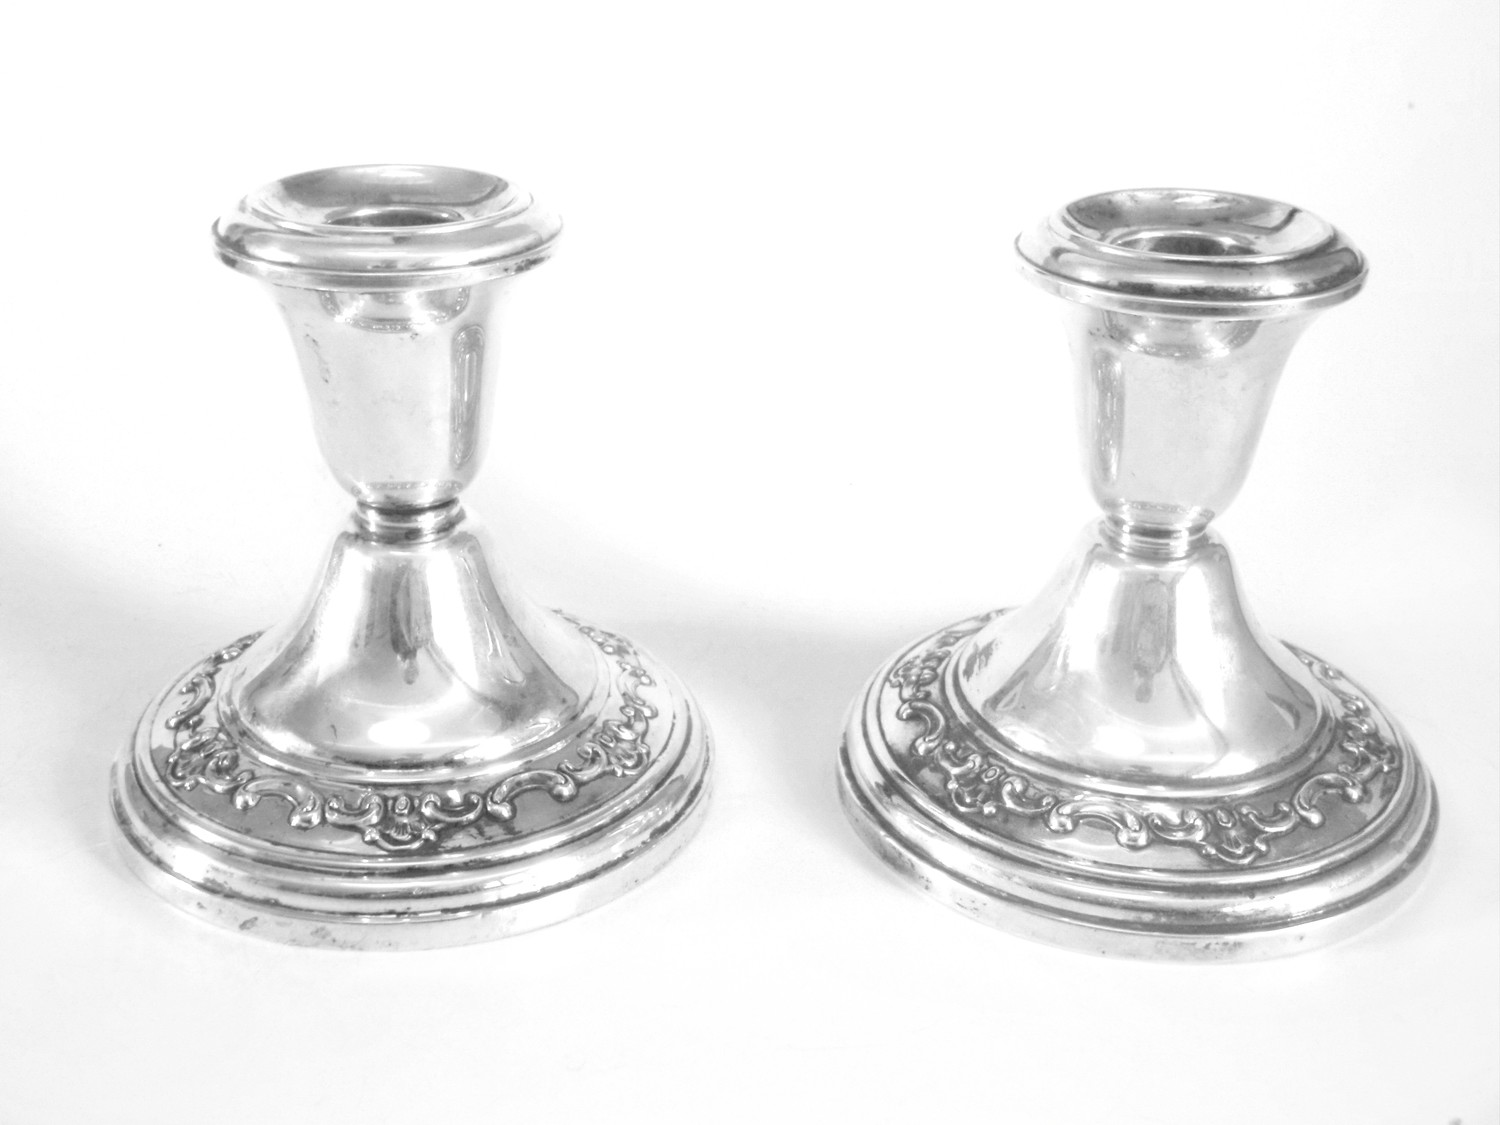 2 Gorham Sterling Silver Candle Holders with Floral Swag Details